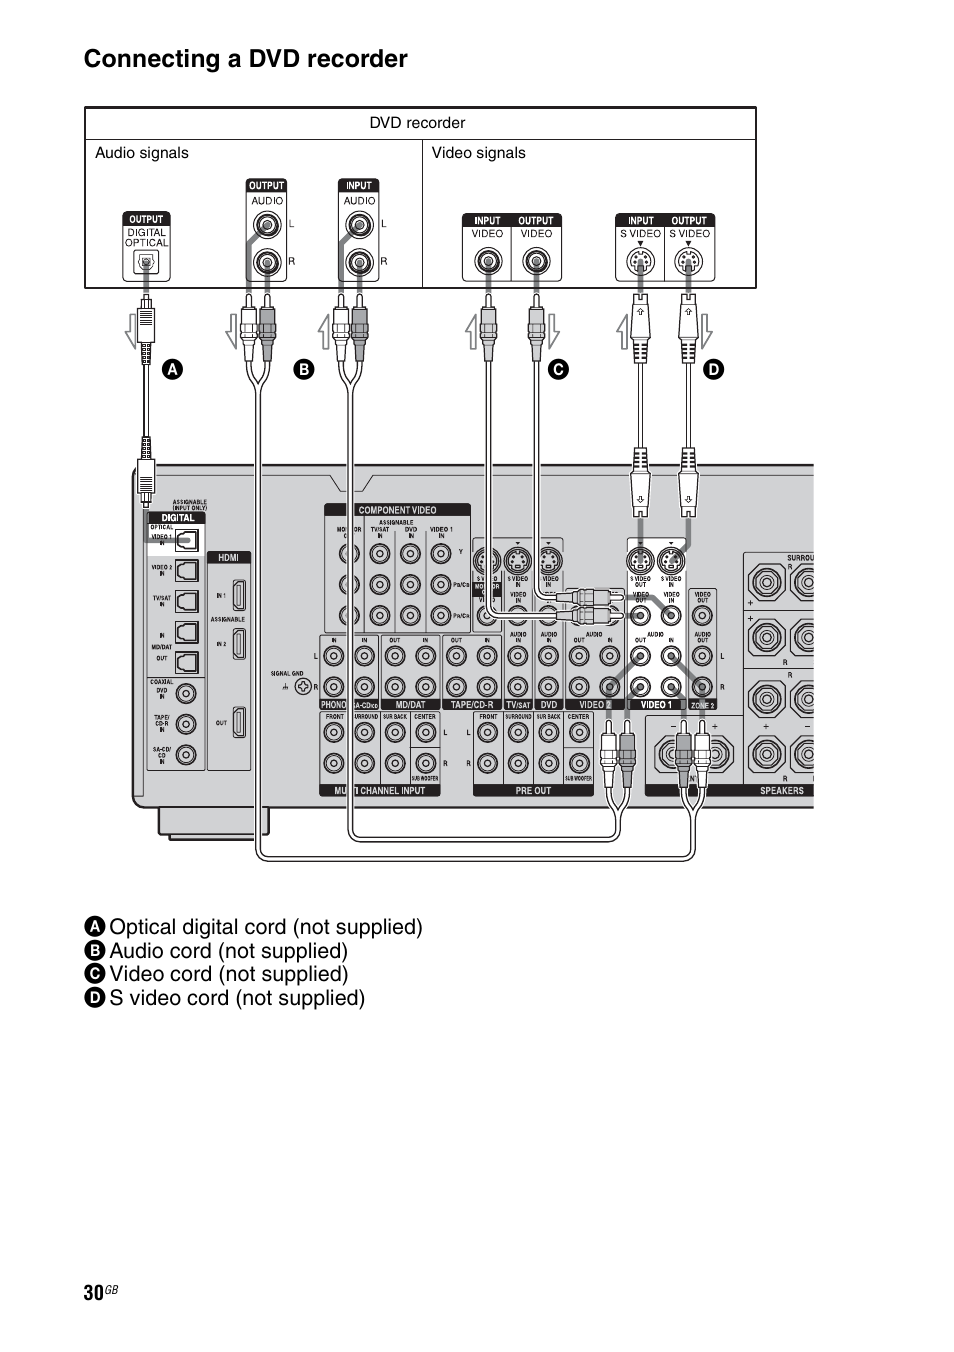 Connecting a dvd recorder | Sony STR-DG1000 User Manual | Page 30 / 123